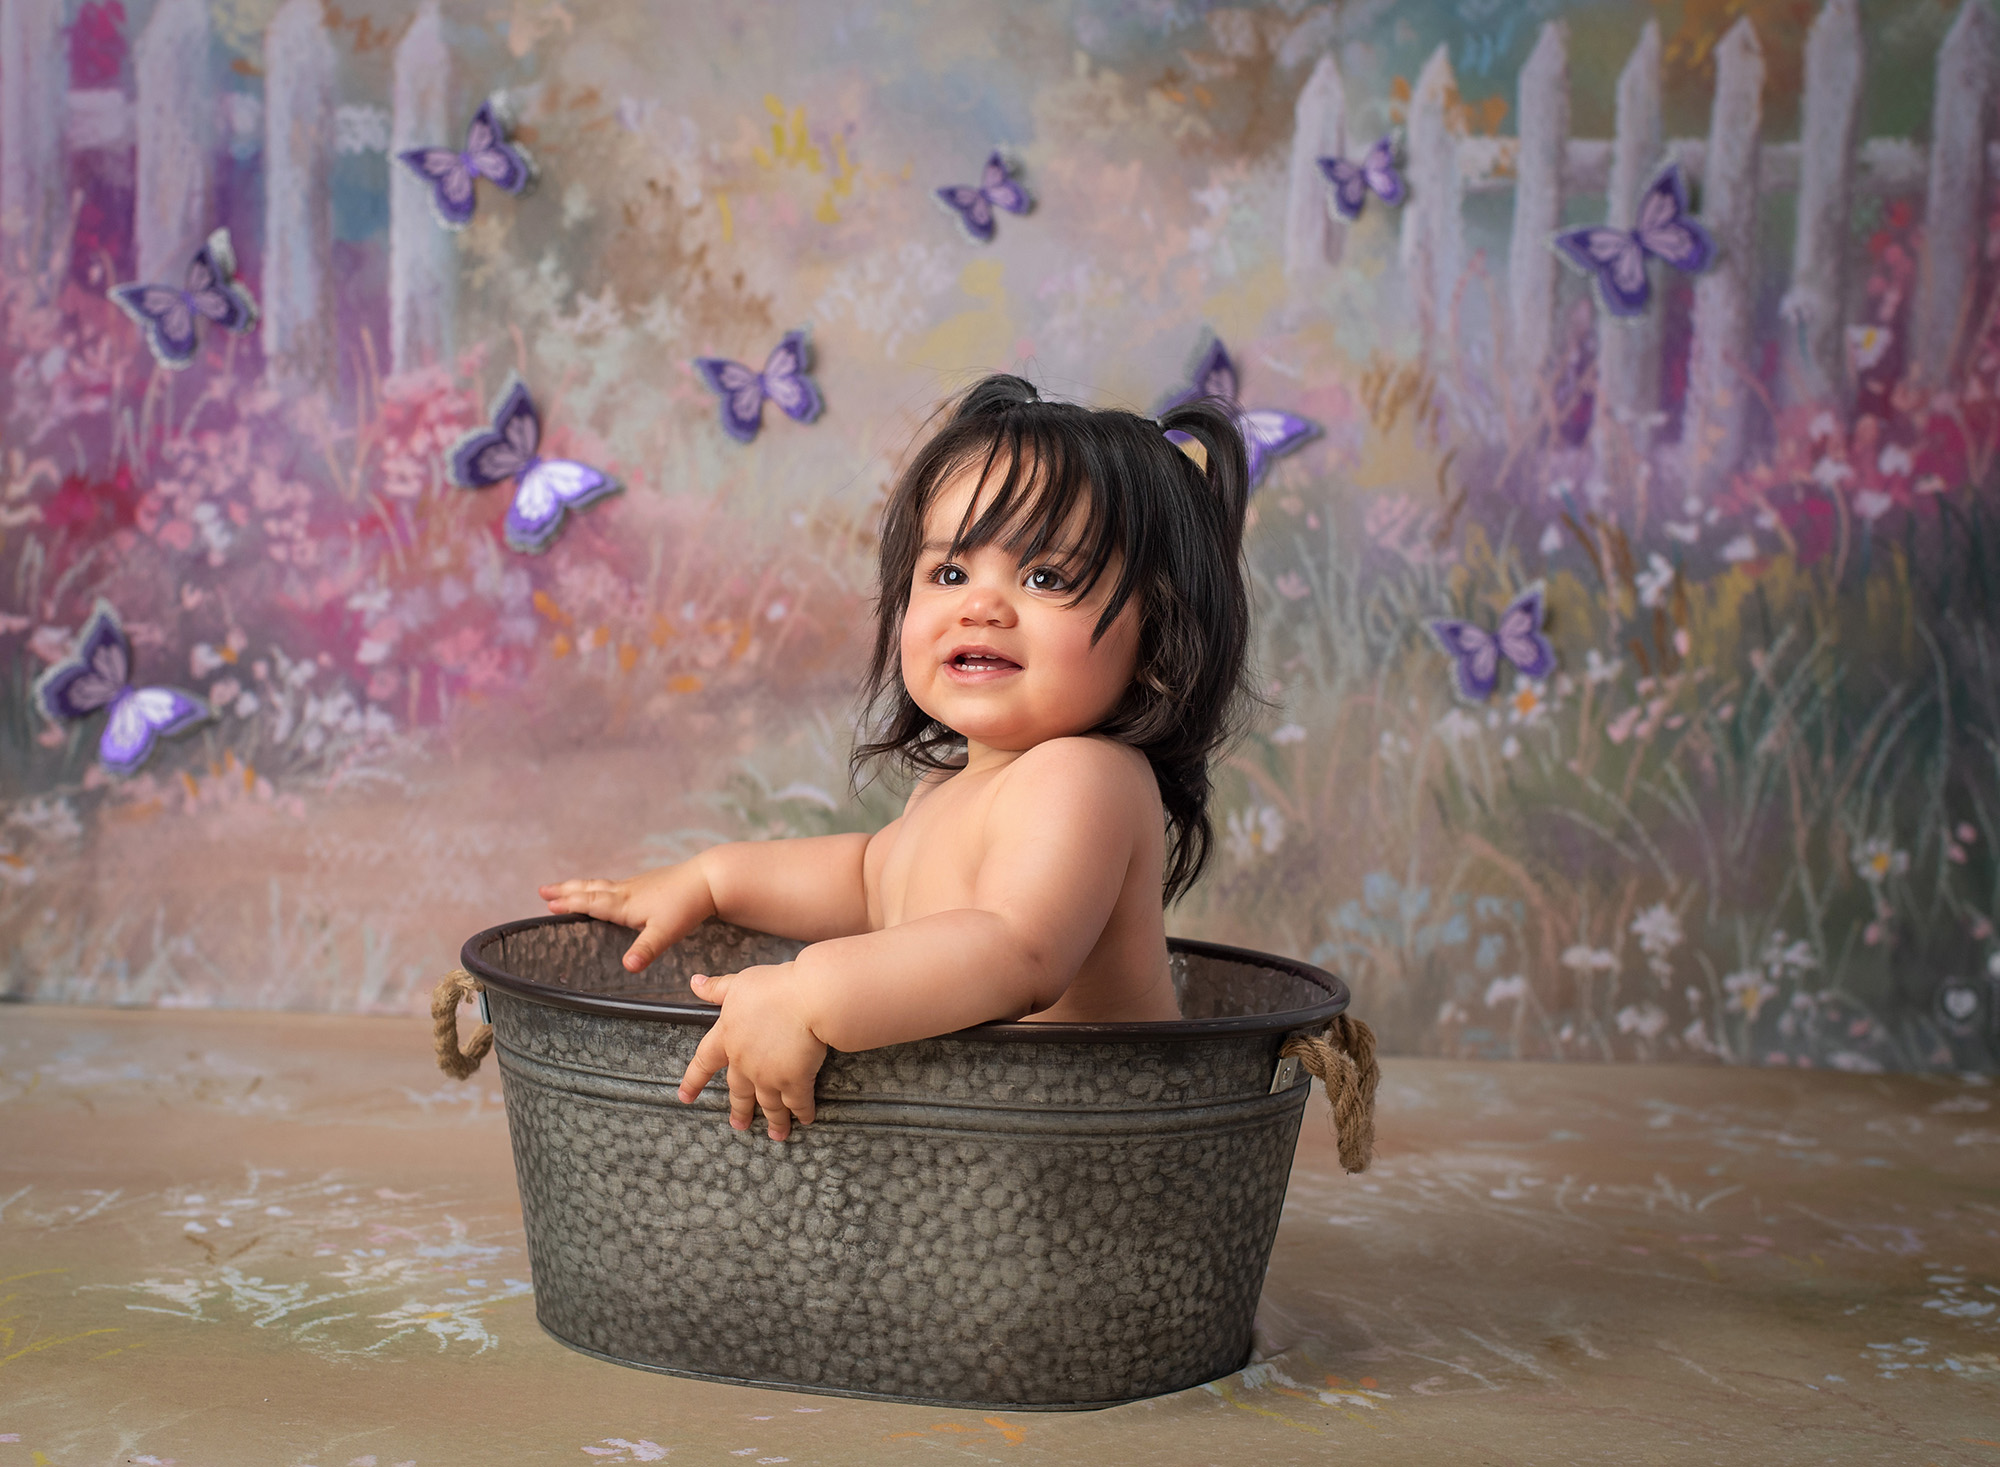 One Year Old Photo Session one year old baby girl in pigtails sitting inside rustic tub with butterfly background